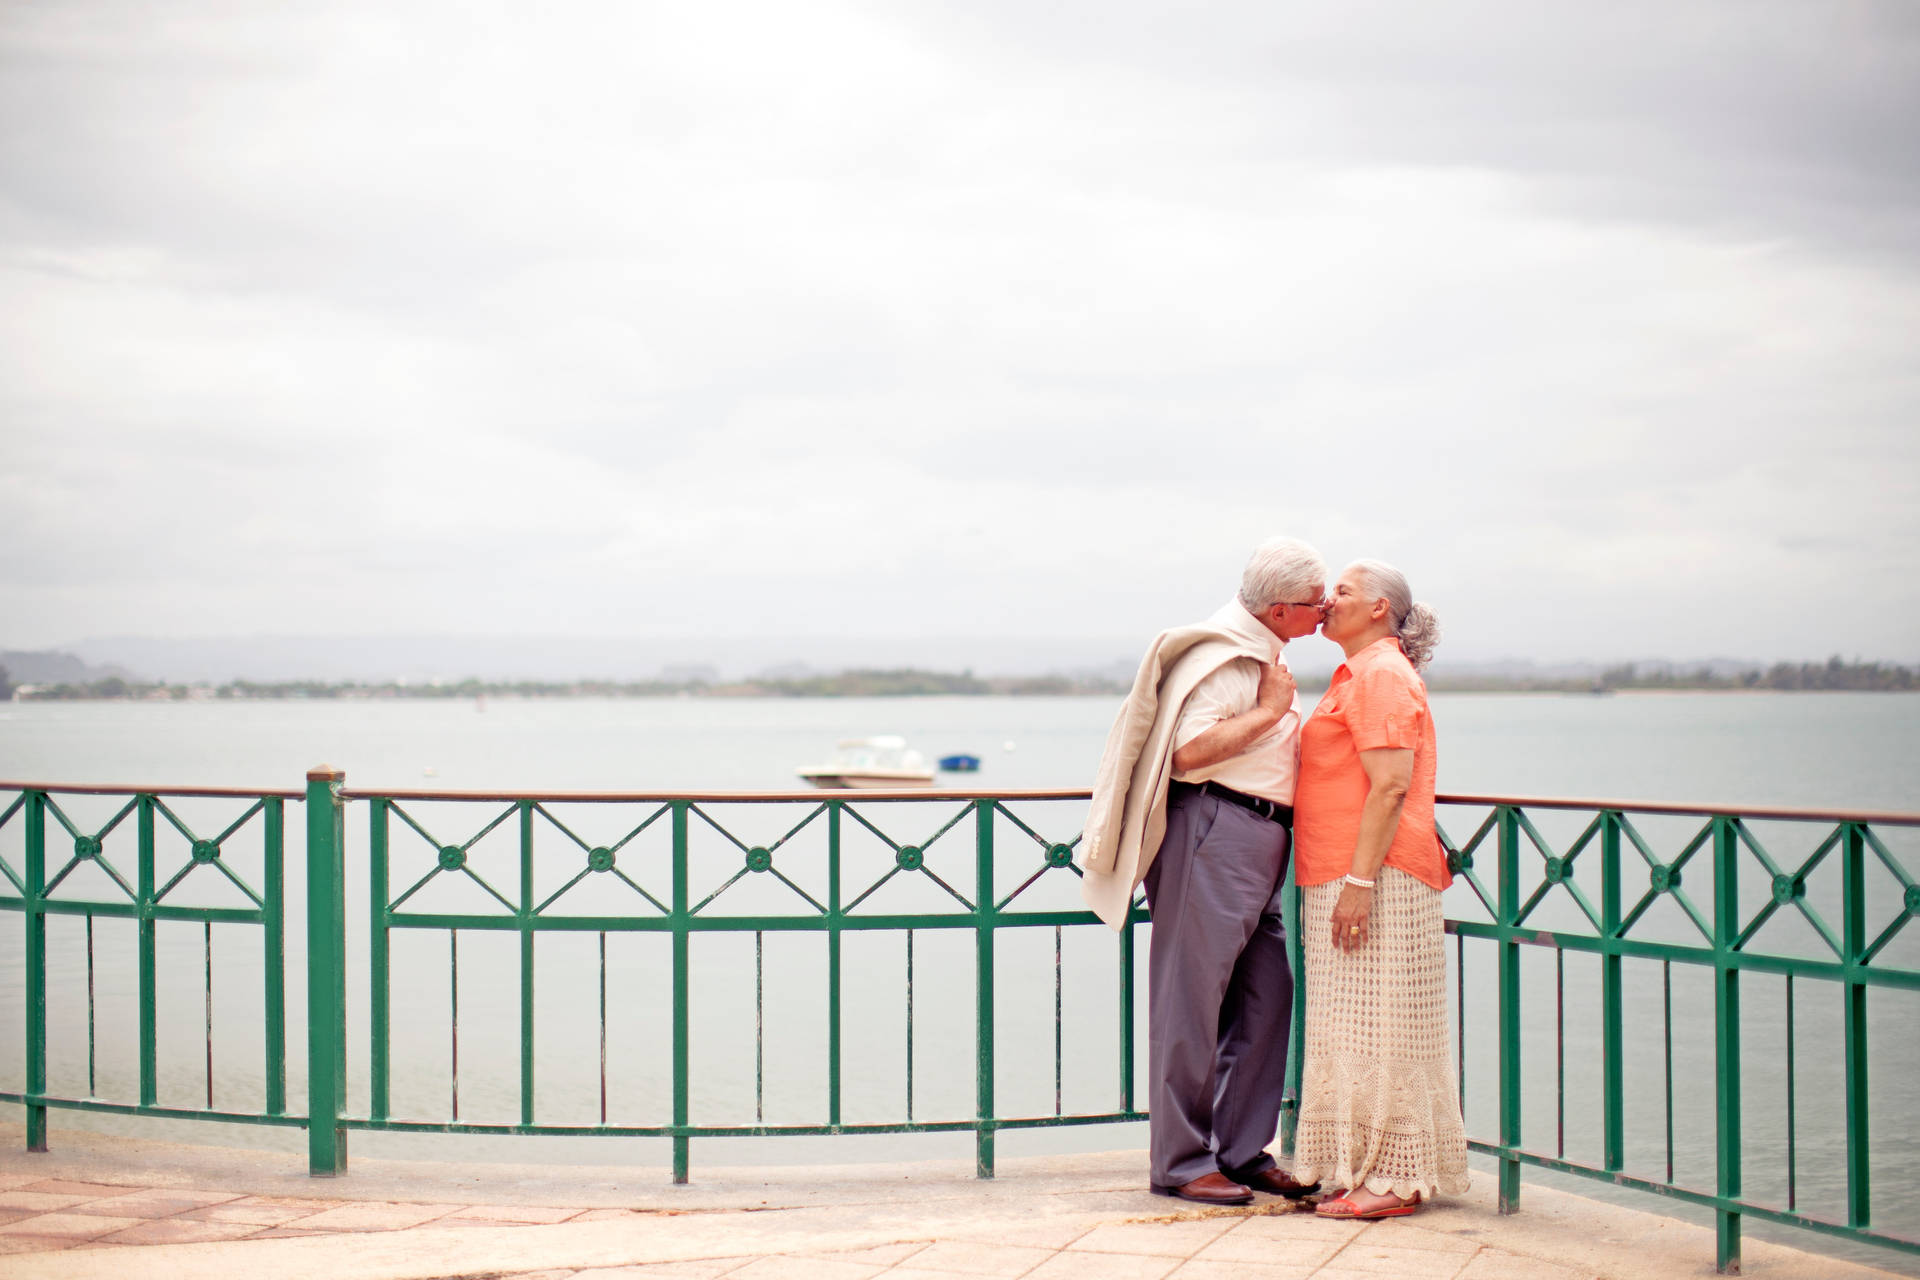 Timeless Love: An Elderly Couple In A Romantic Embrace